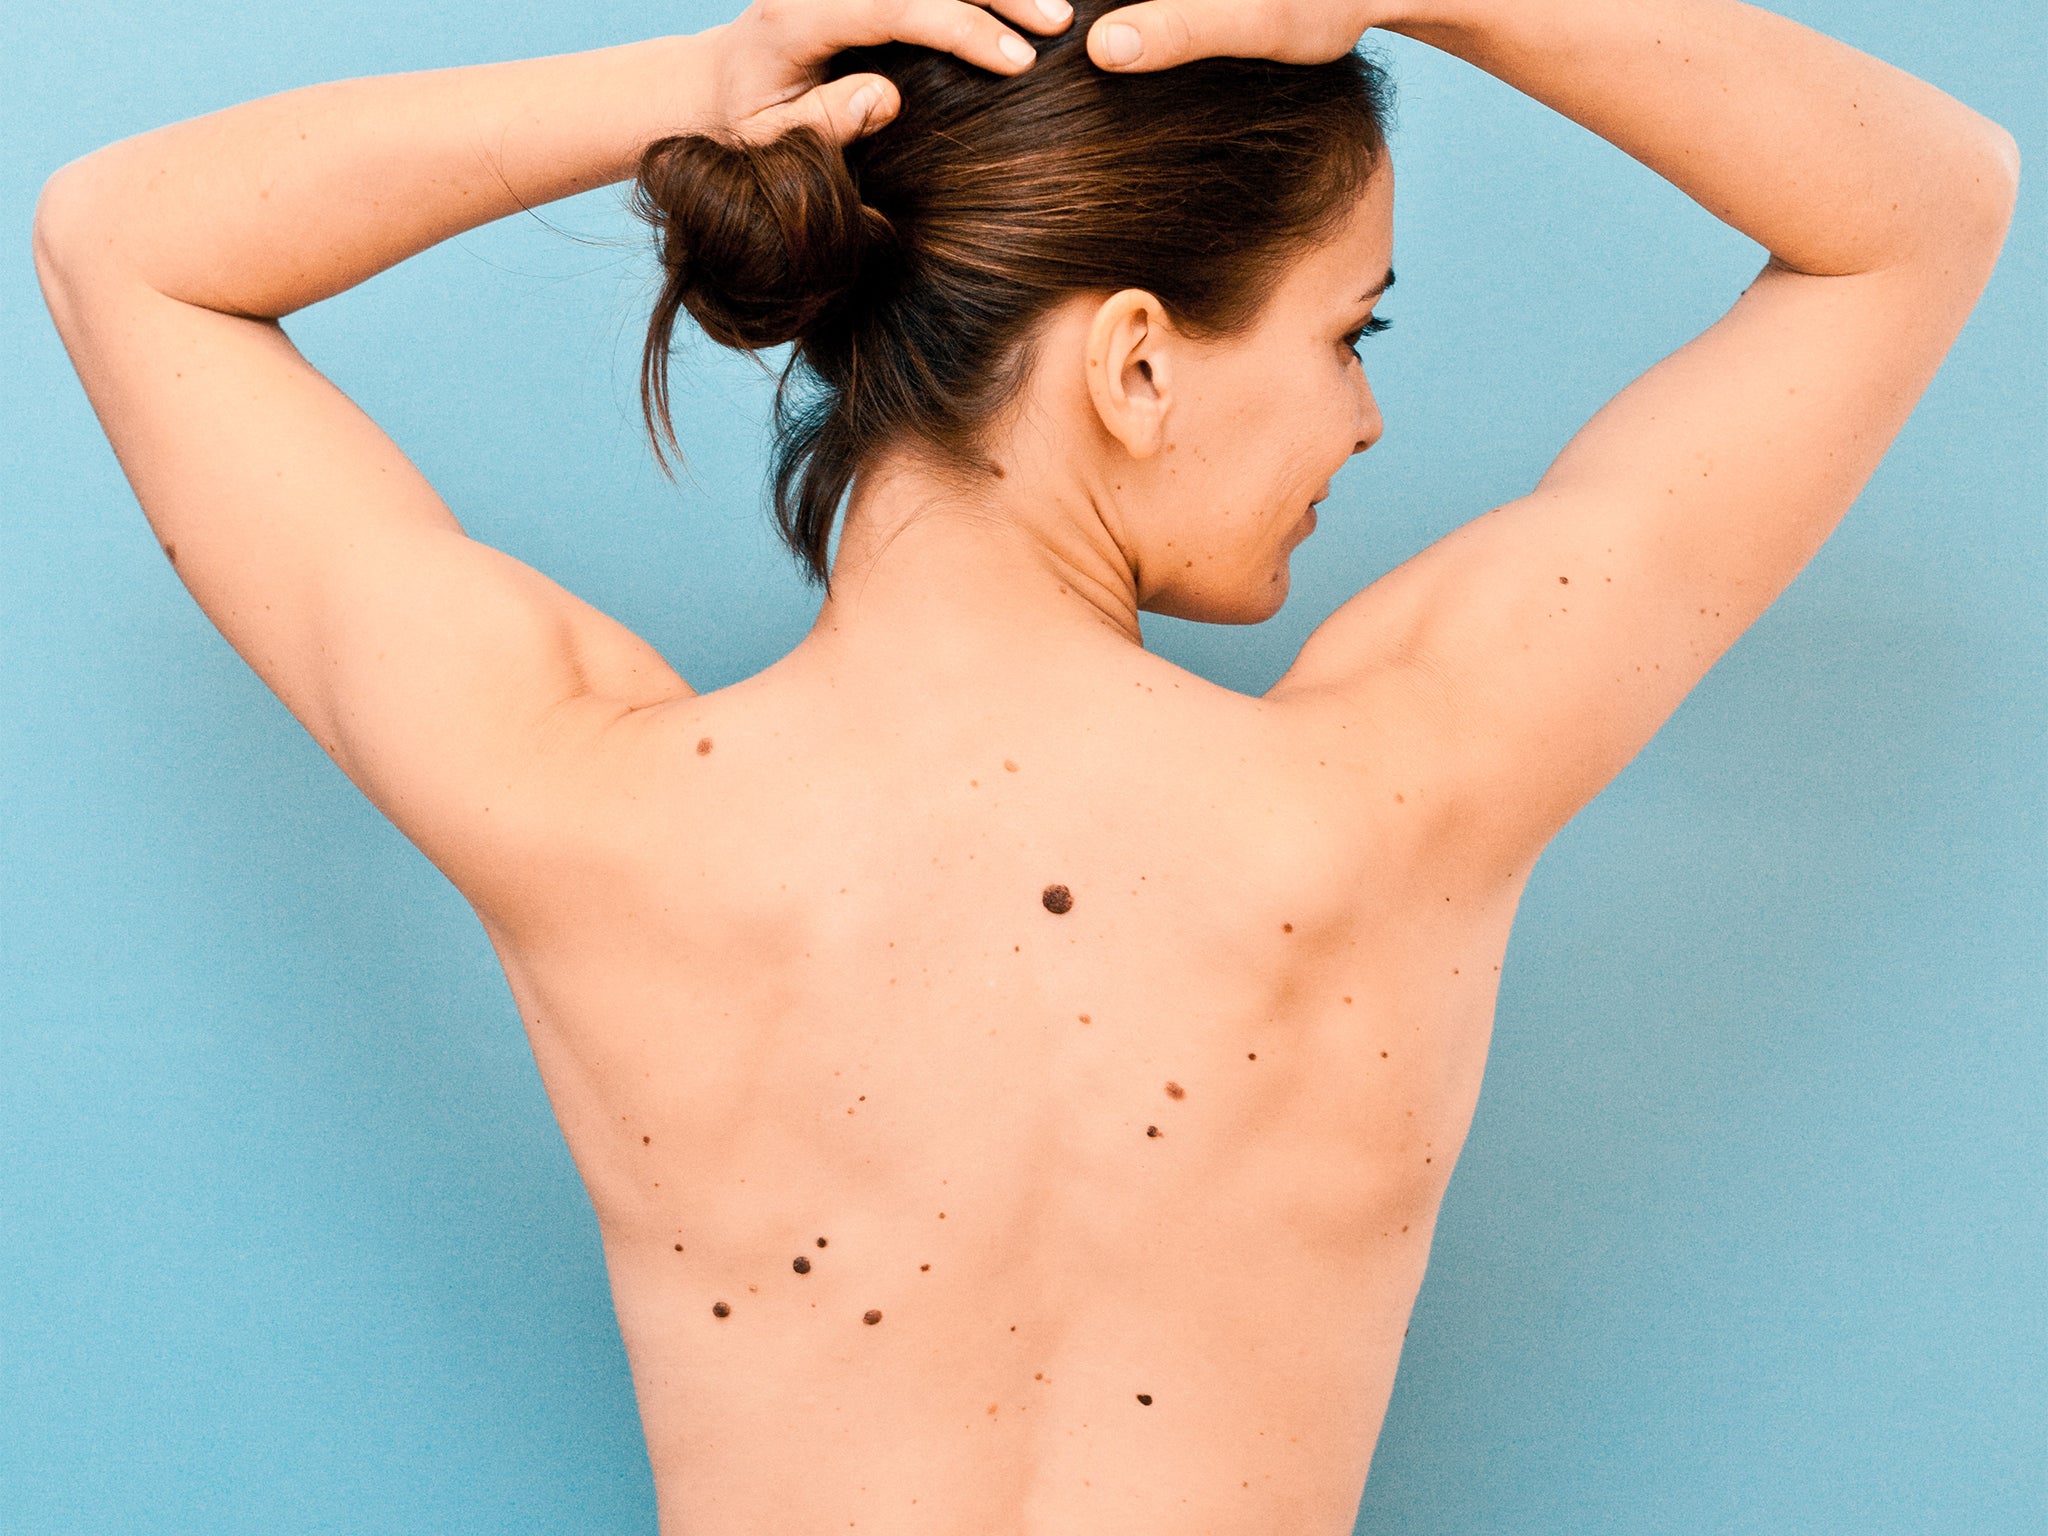 The experts found that the area above the right elbow was particularly predictive of the total body count of moles.